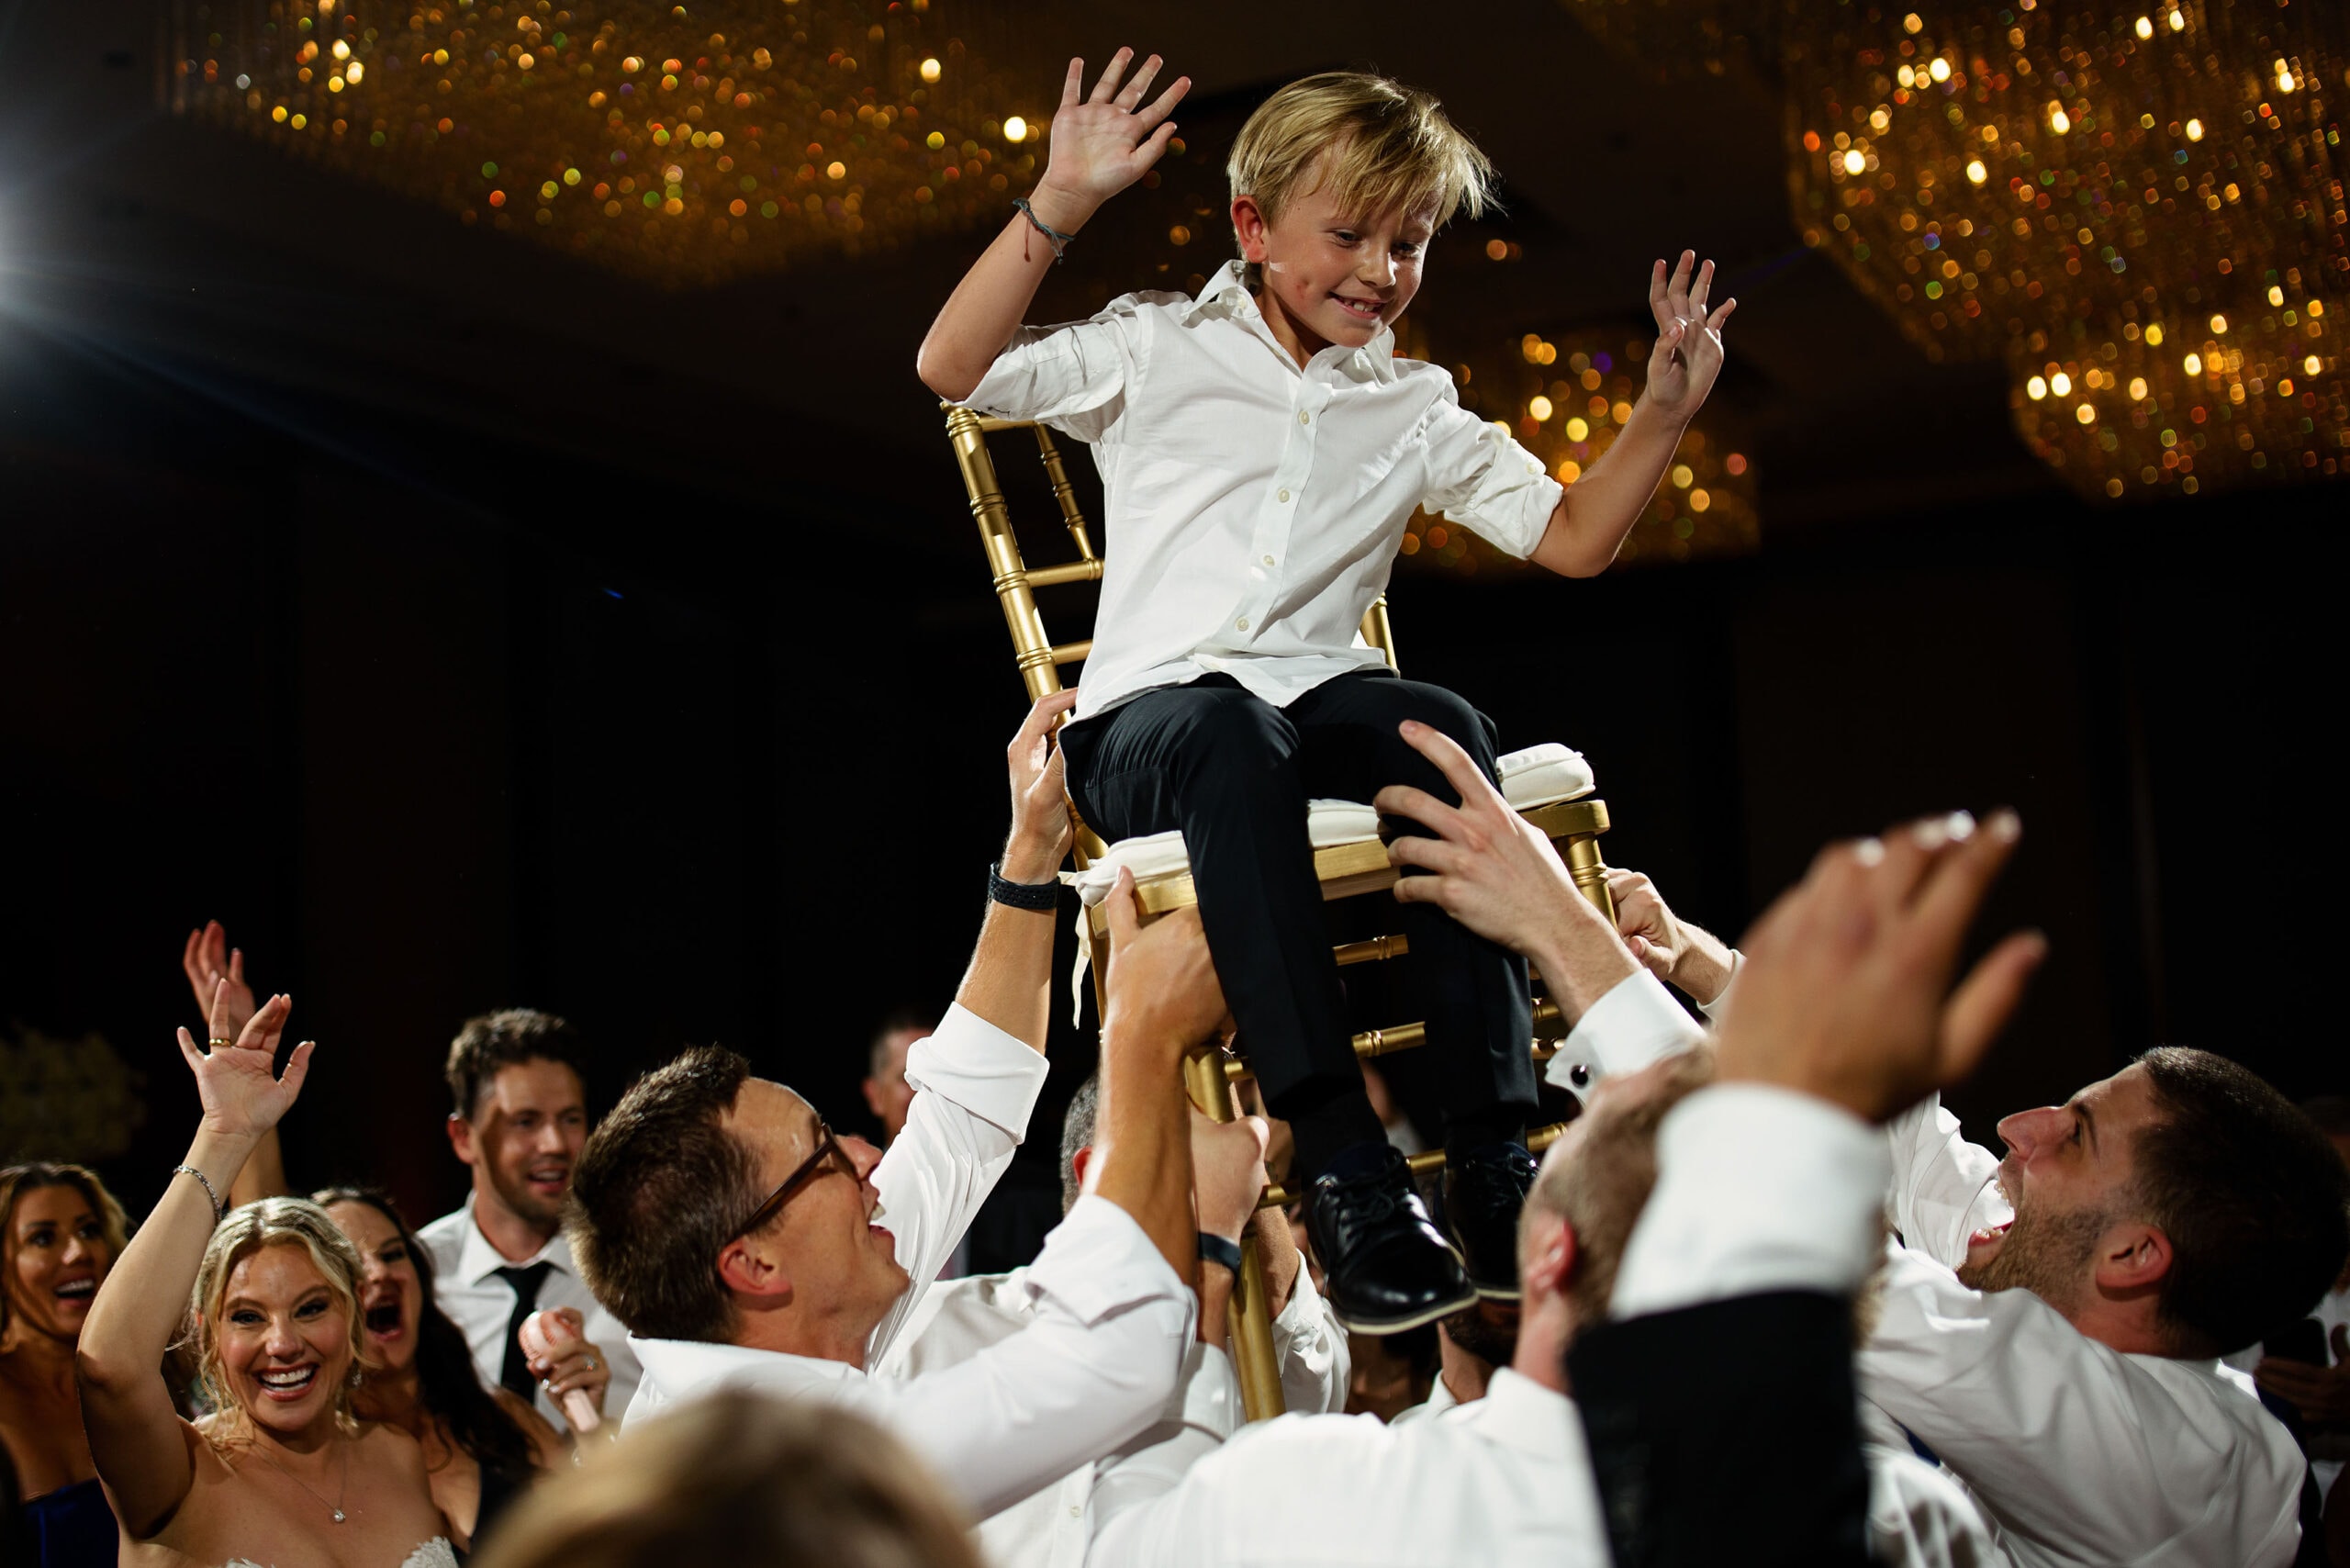 A young guest is lifted into the air during a wedding reception at Four Seasons Hotel Denver